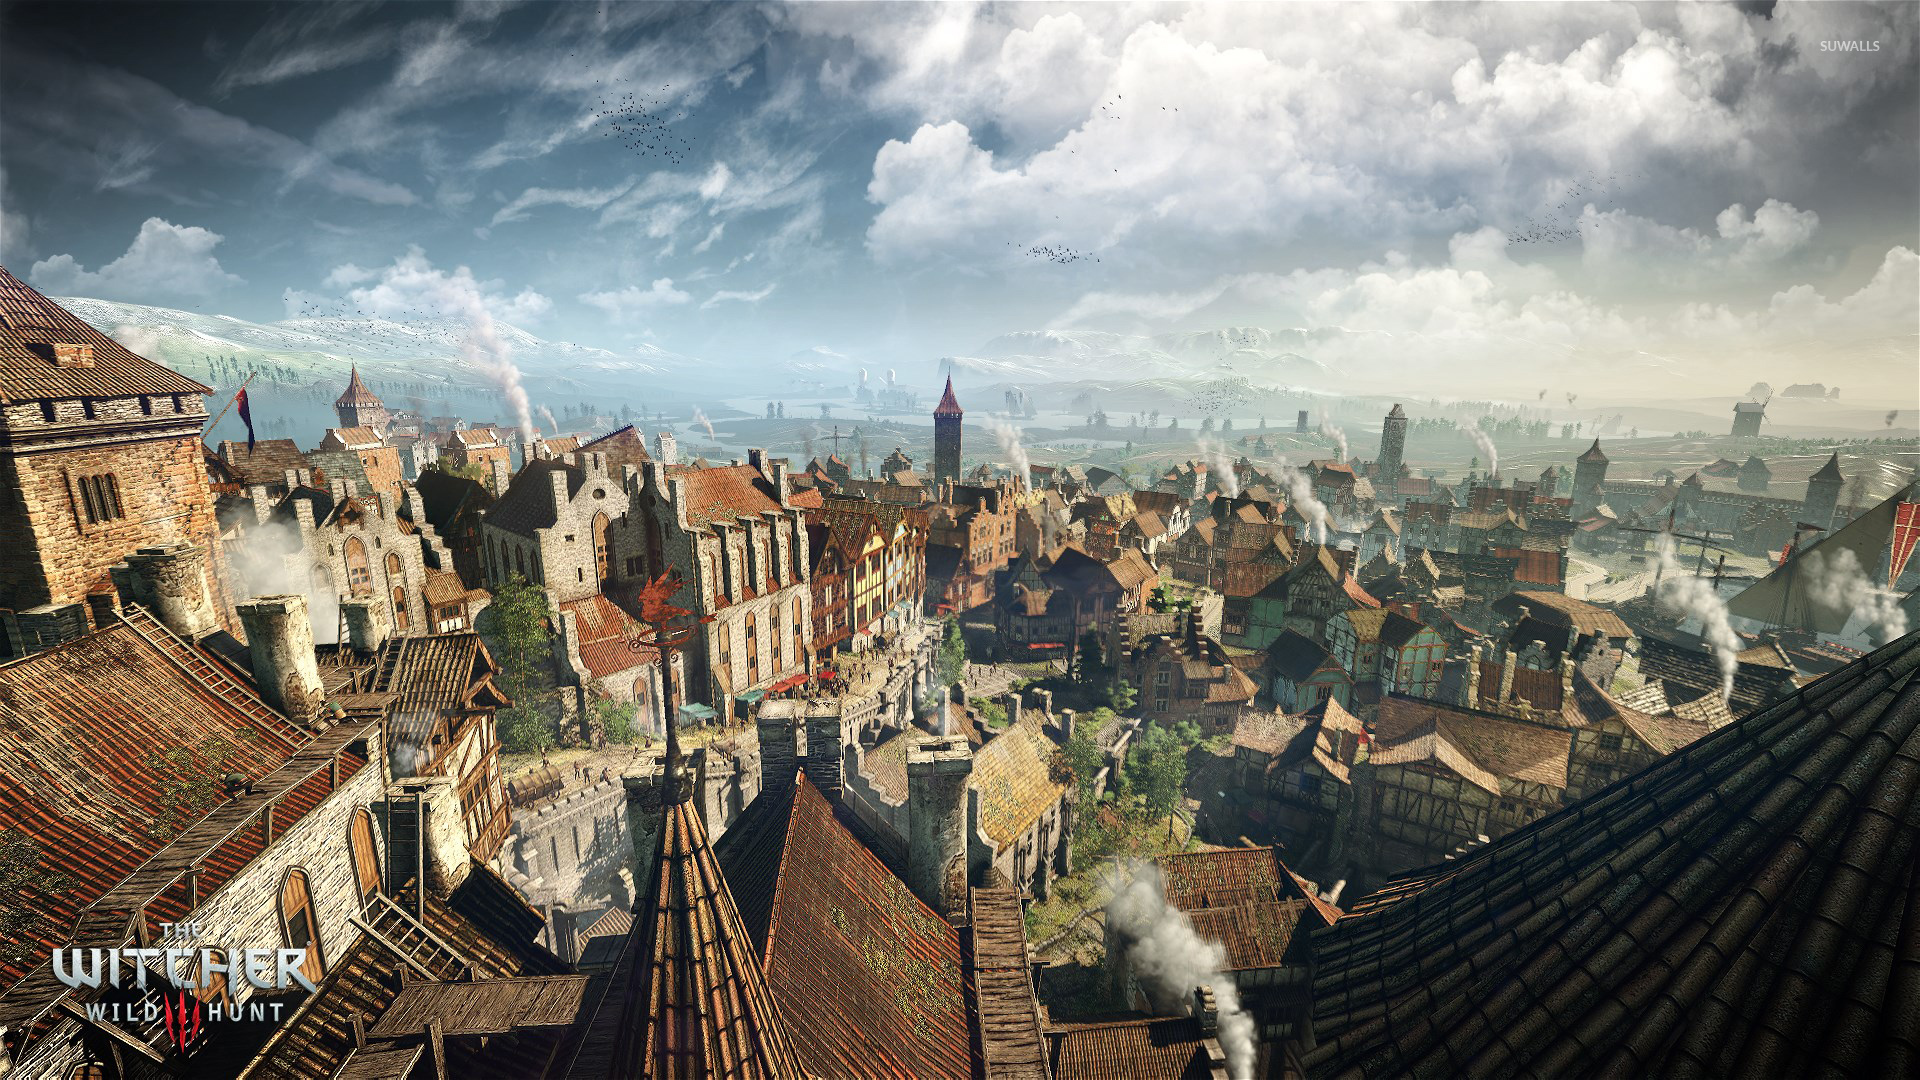  town in The Witcher 3 Wild Hunt wallpaper   Game wallpapers   49402 1680x1050